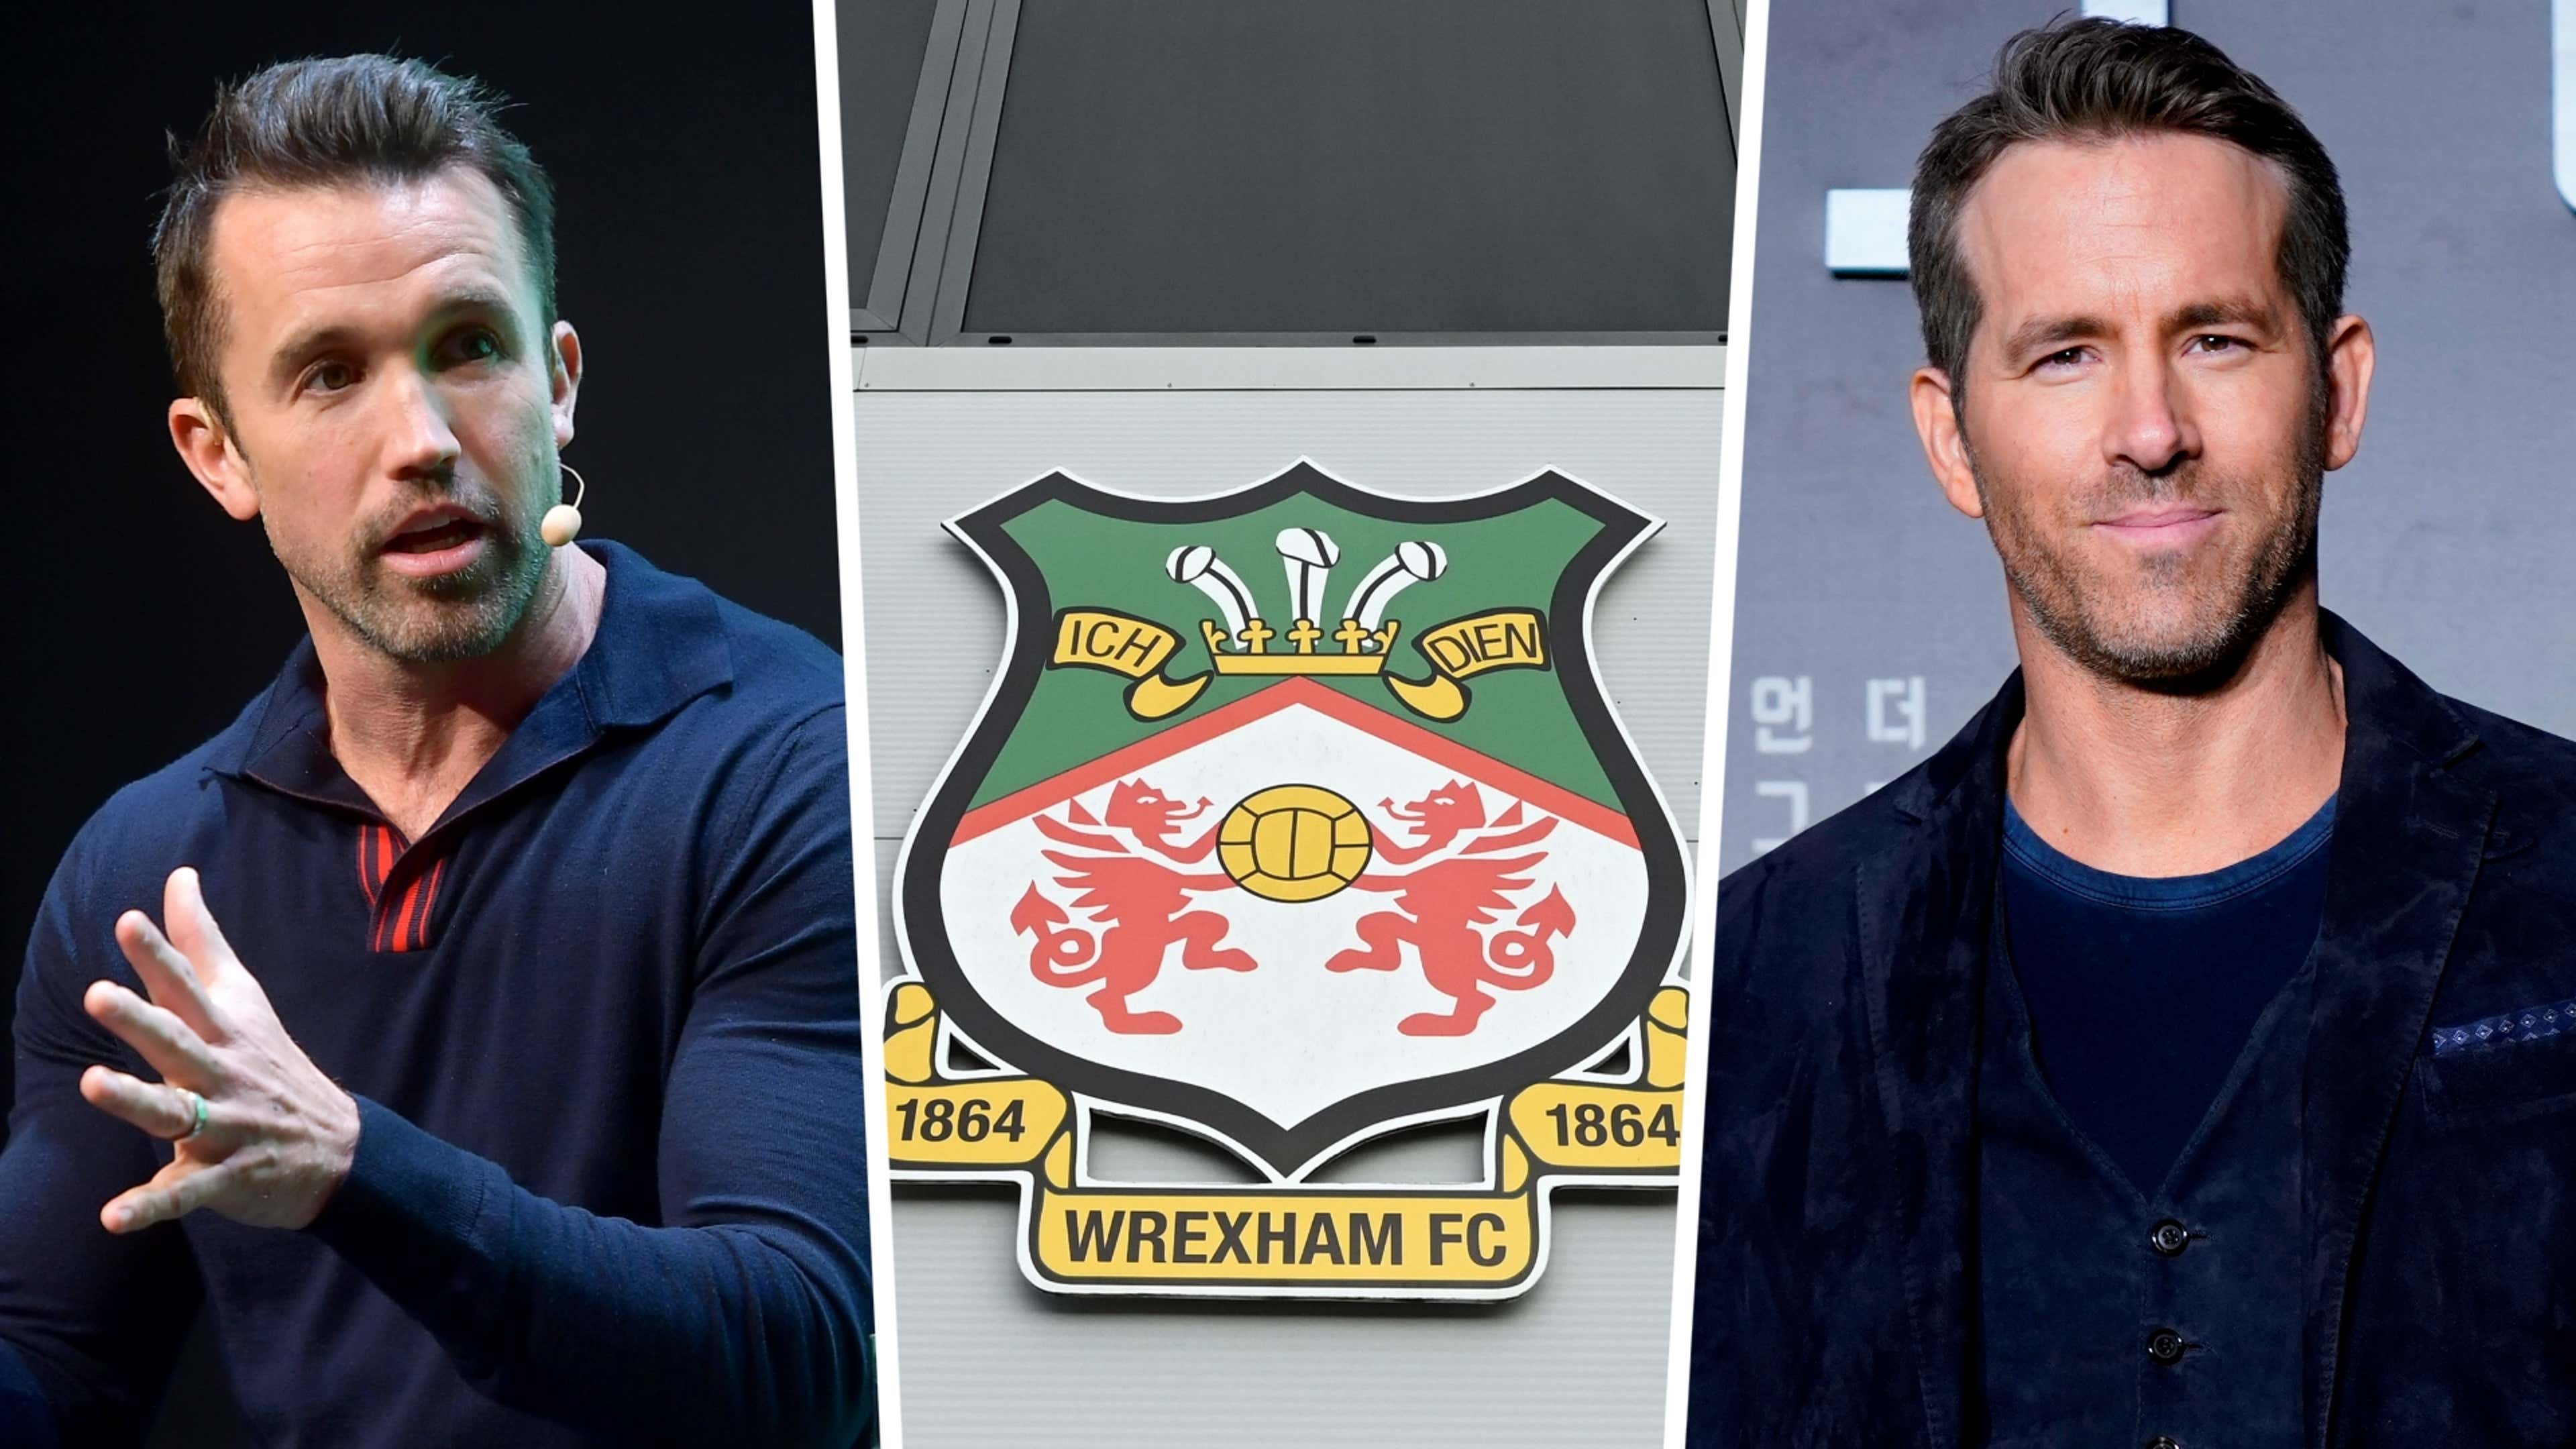 Welsh football club Wrexham, owned by Ryan Reynolds and Rob